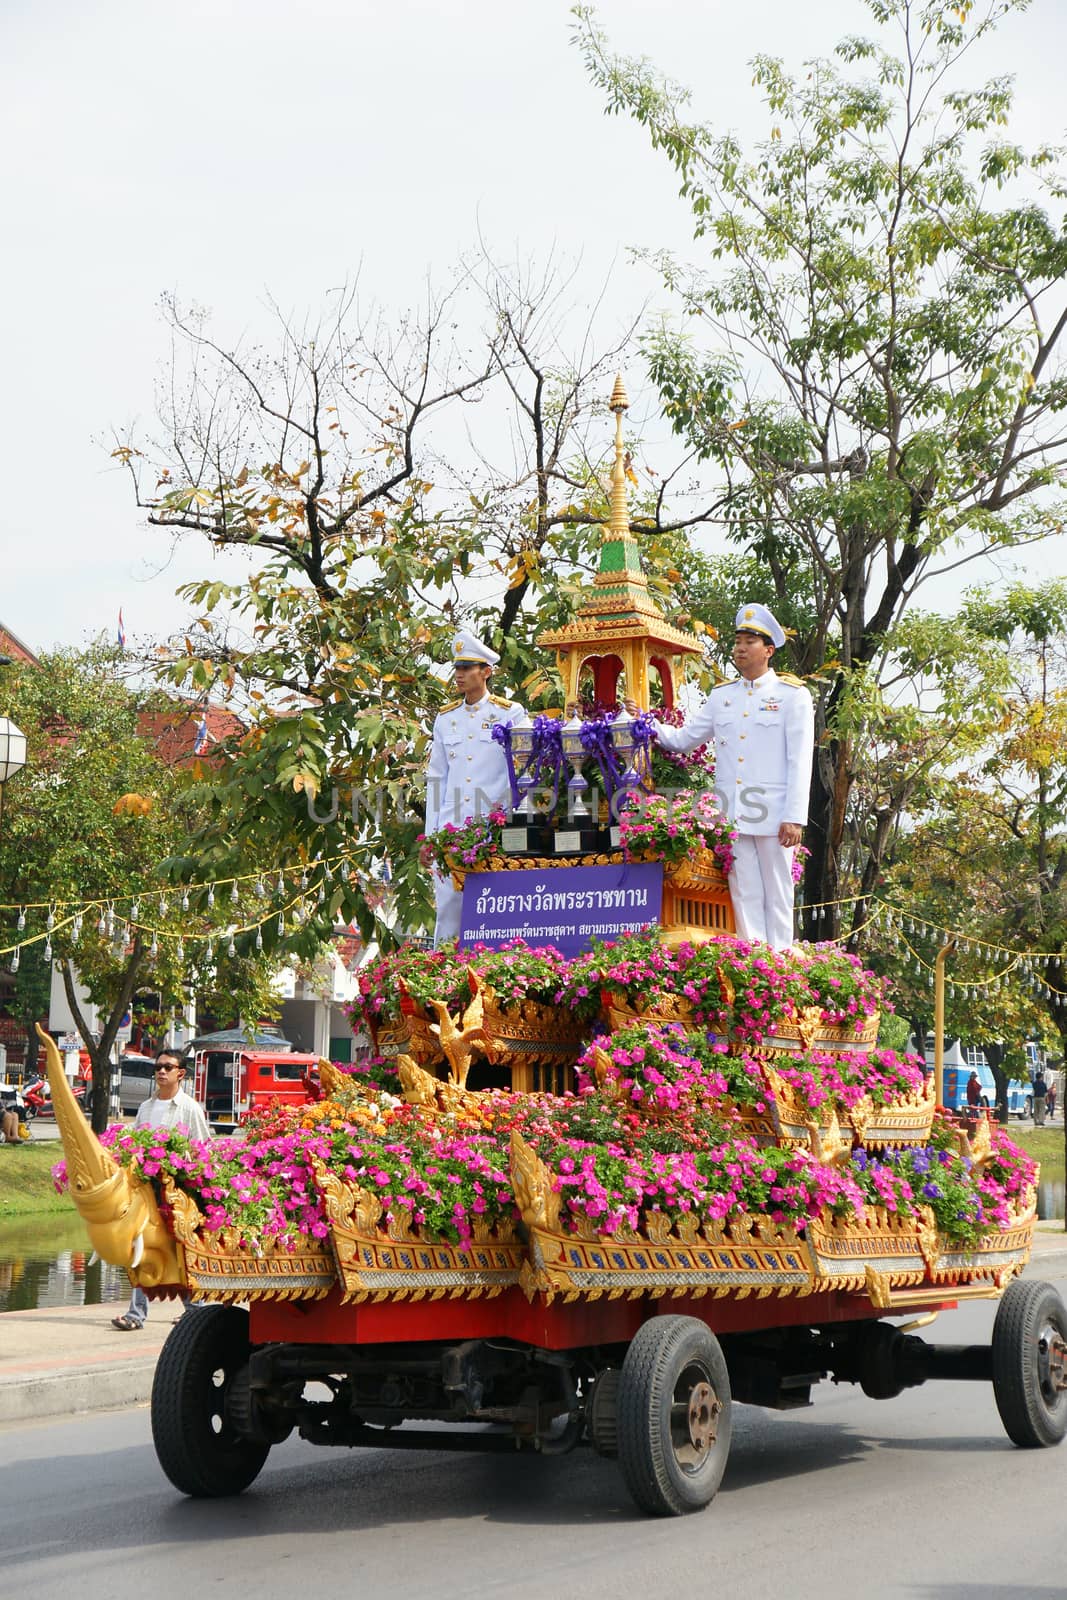 Thai people on the parade in ChiangMai Flower Festival 2013 by mranucha